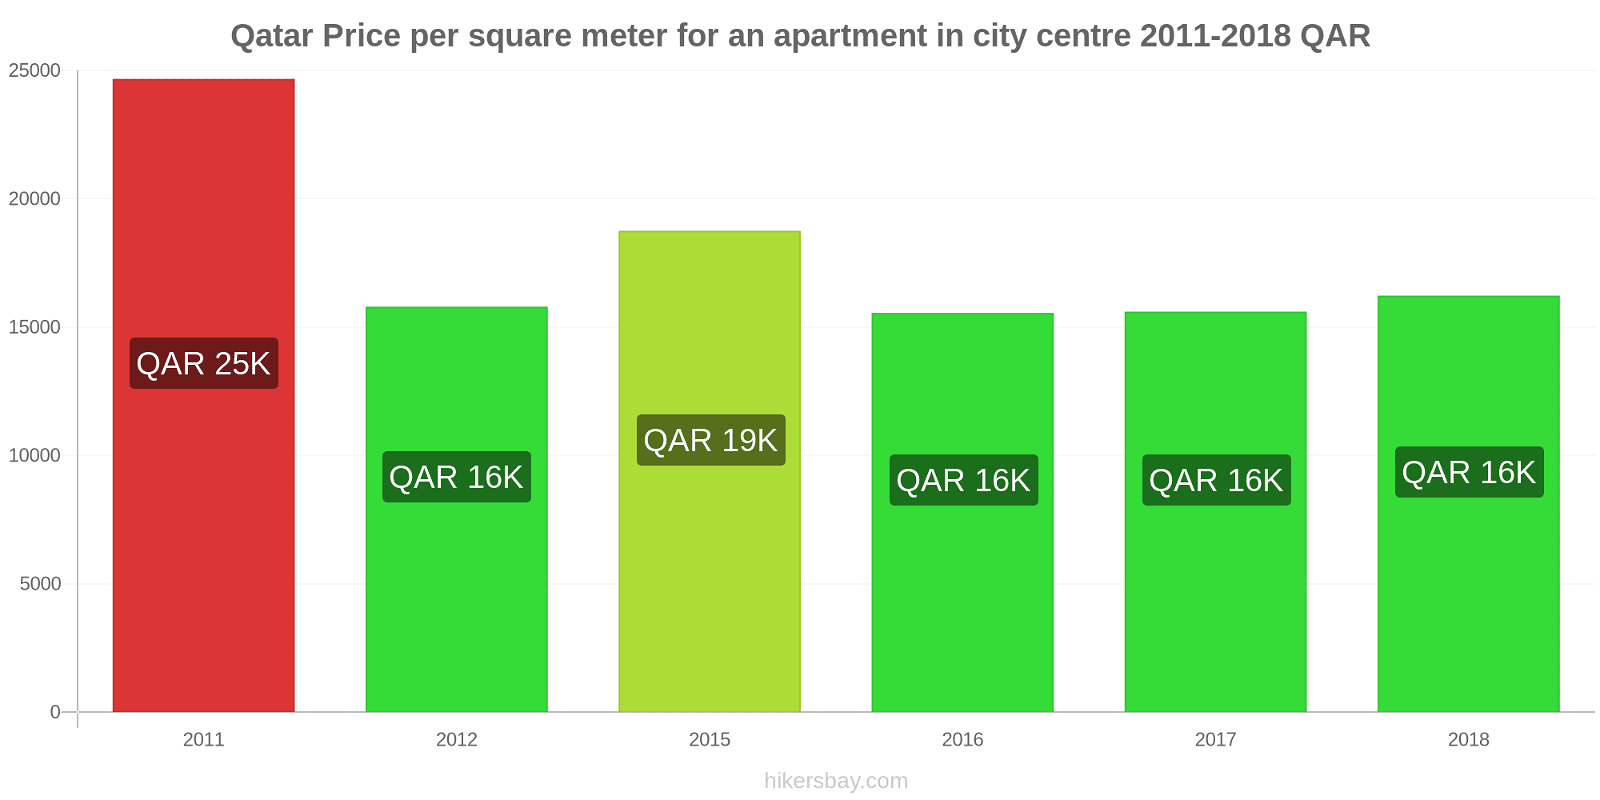 Qatar price changes Price per square meter for an apartment in the city center hikersbay.com